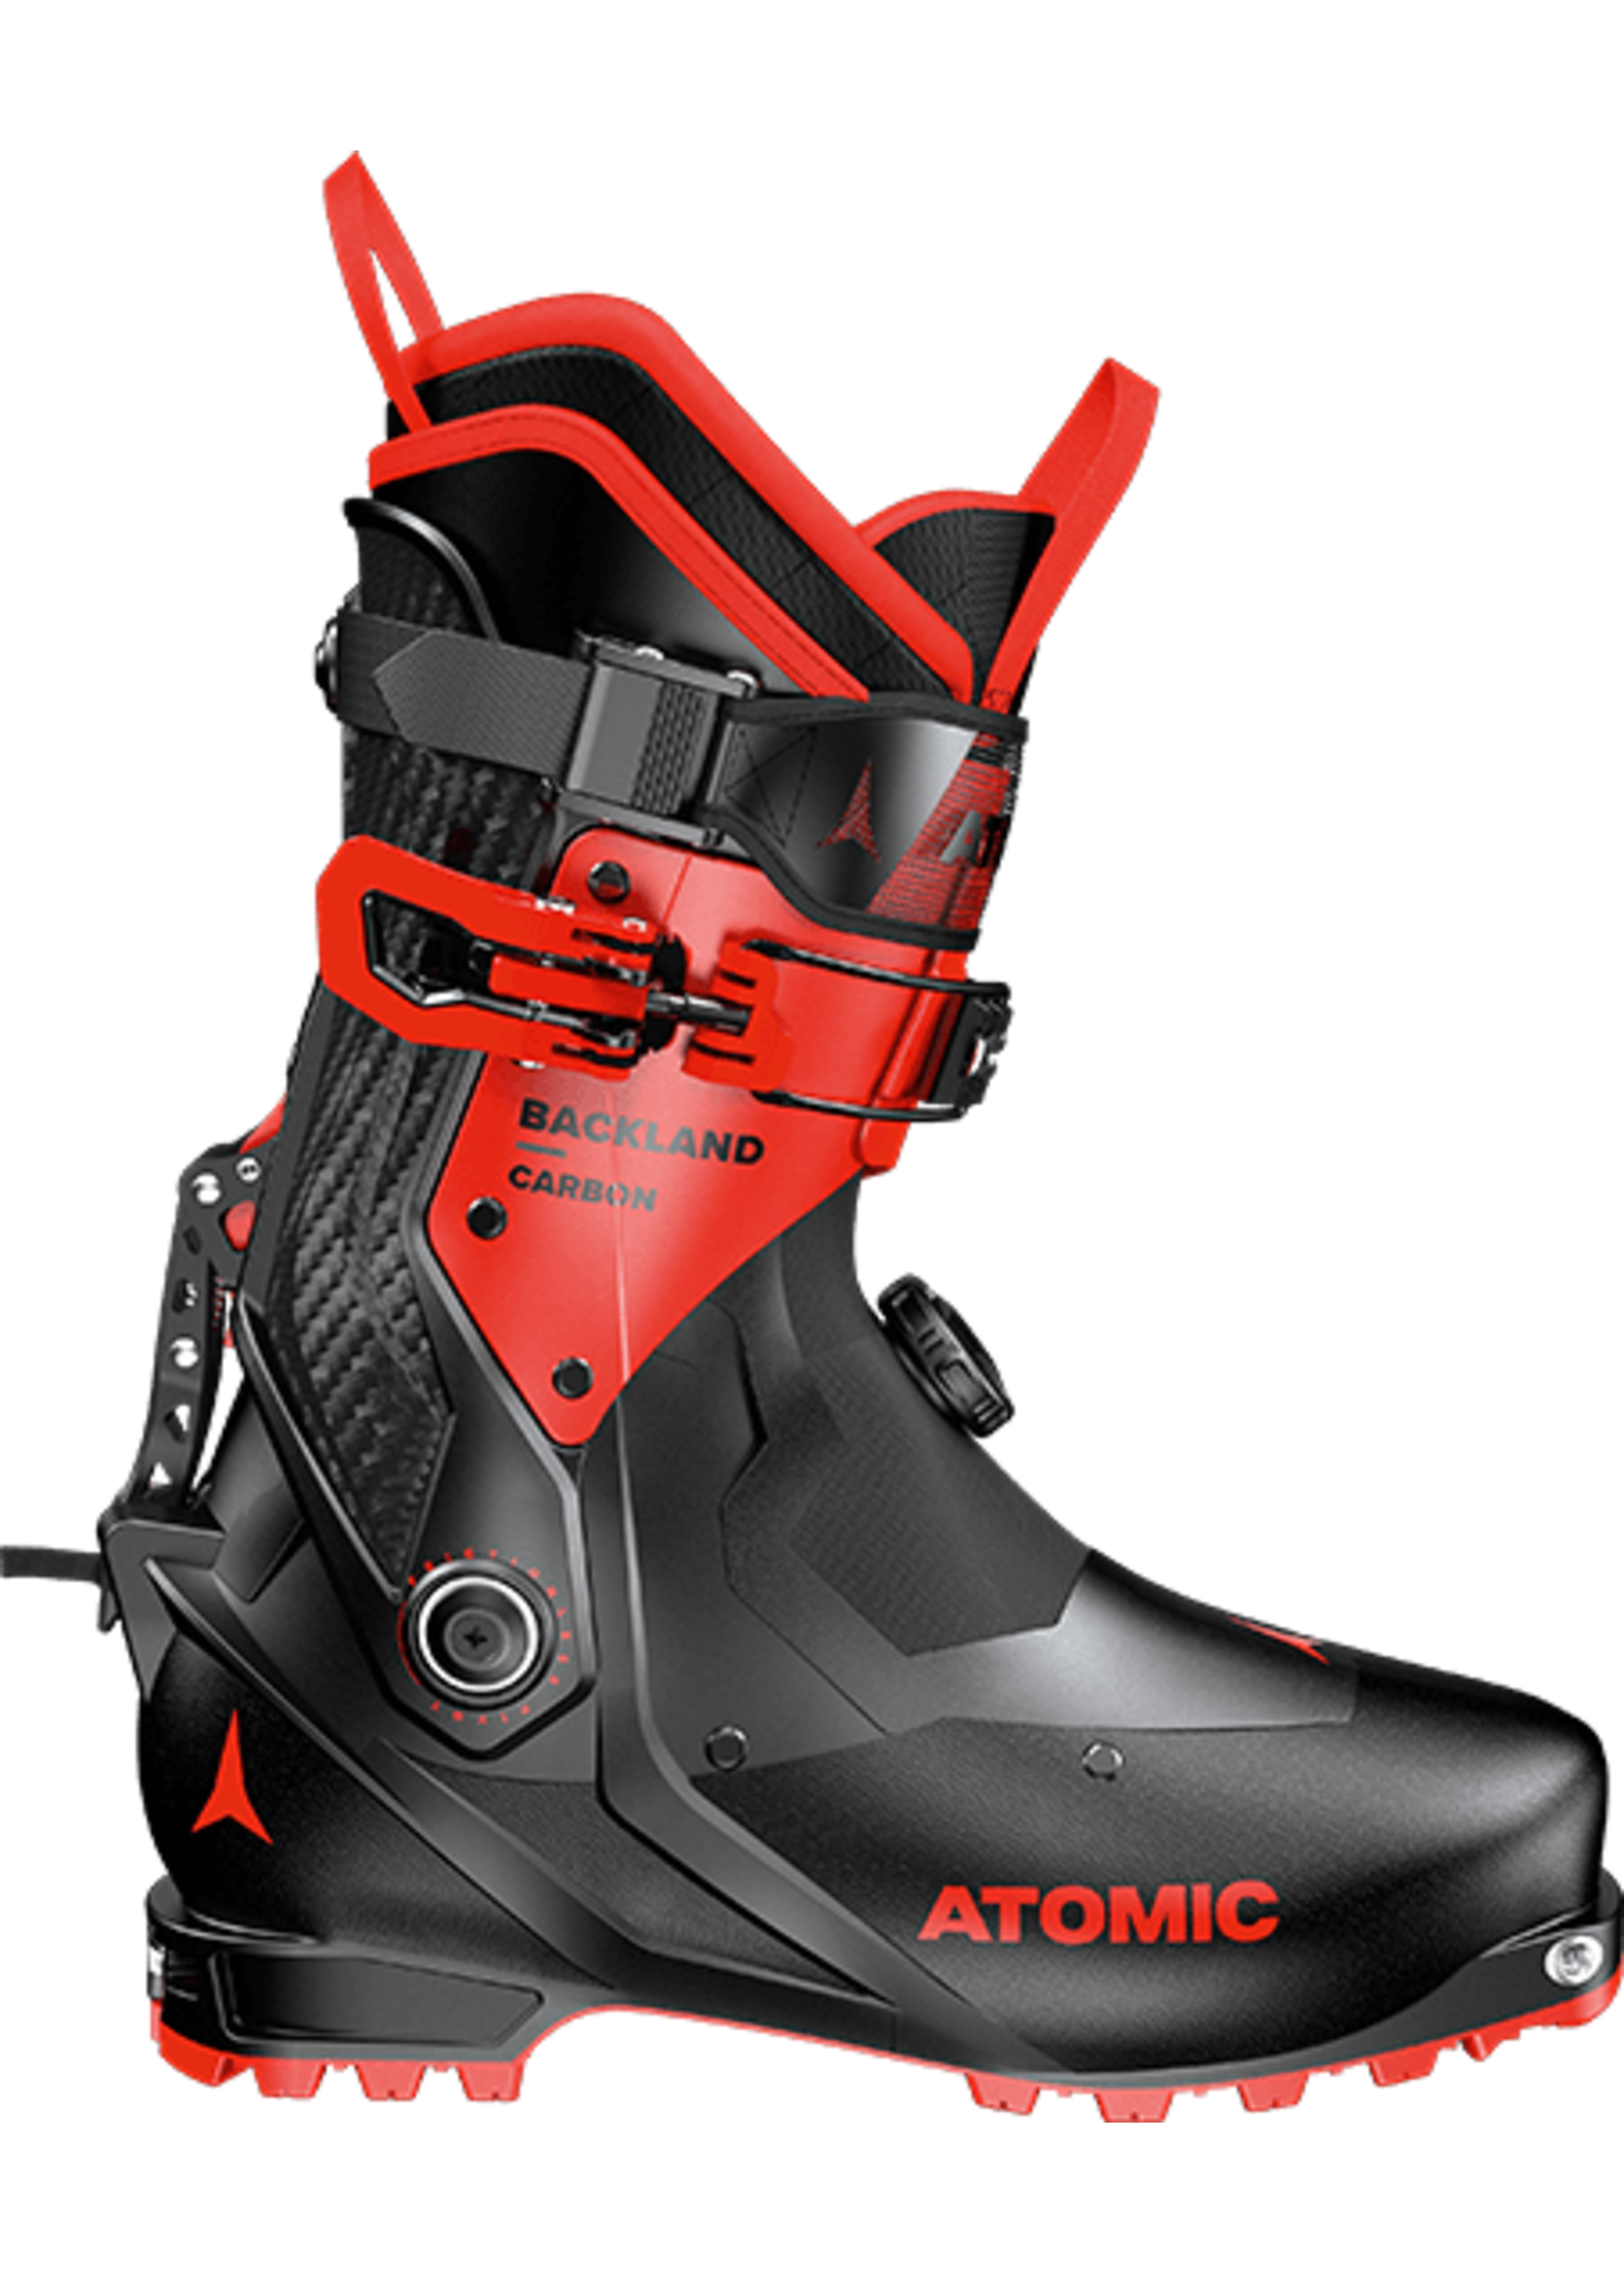 Atomic Touring Boot Backland Carb